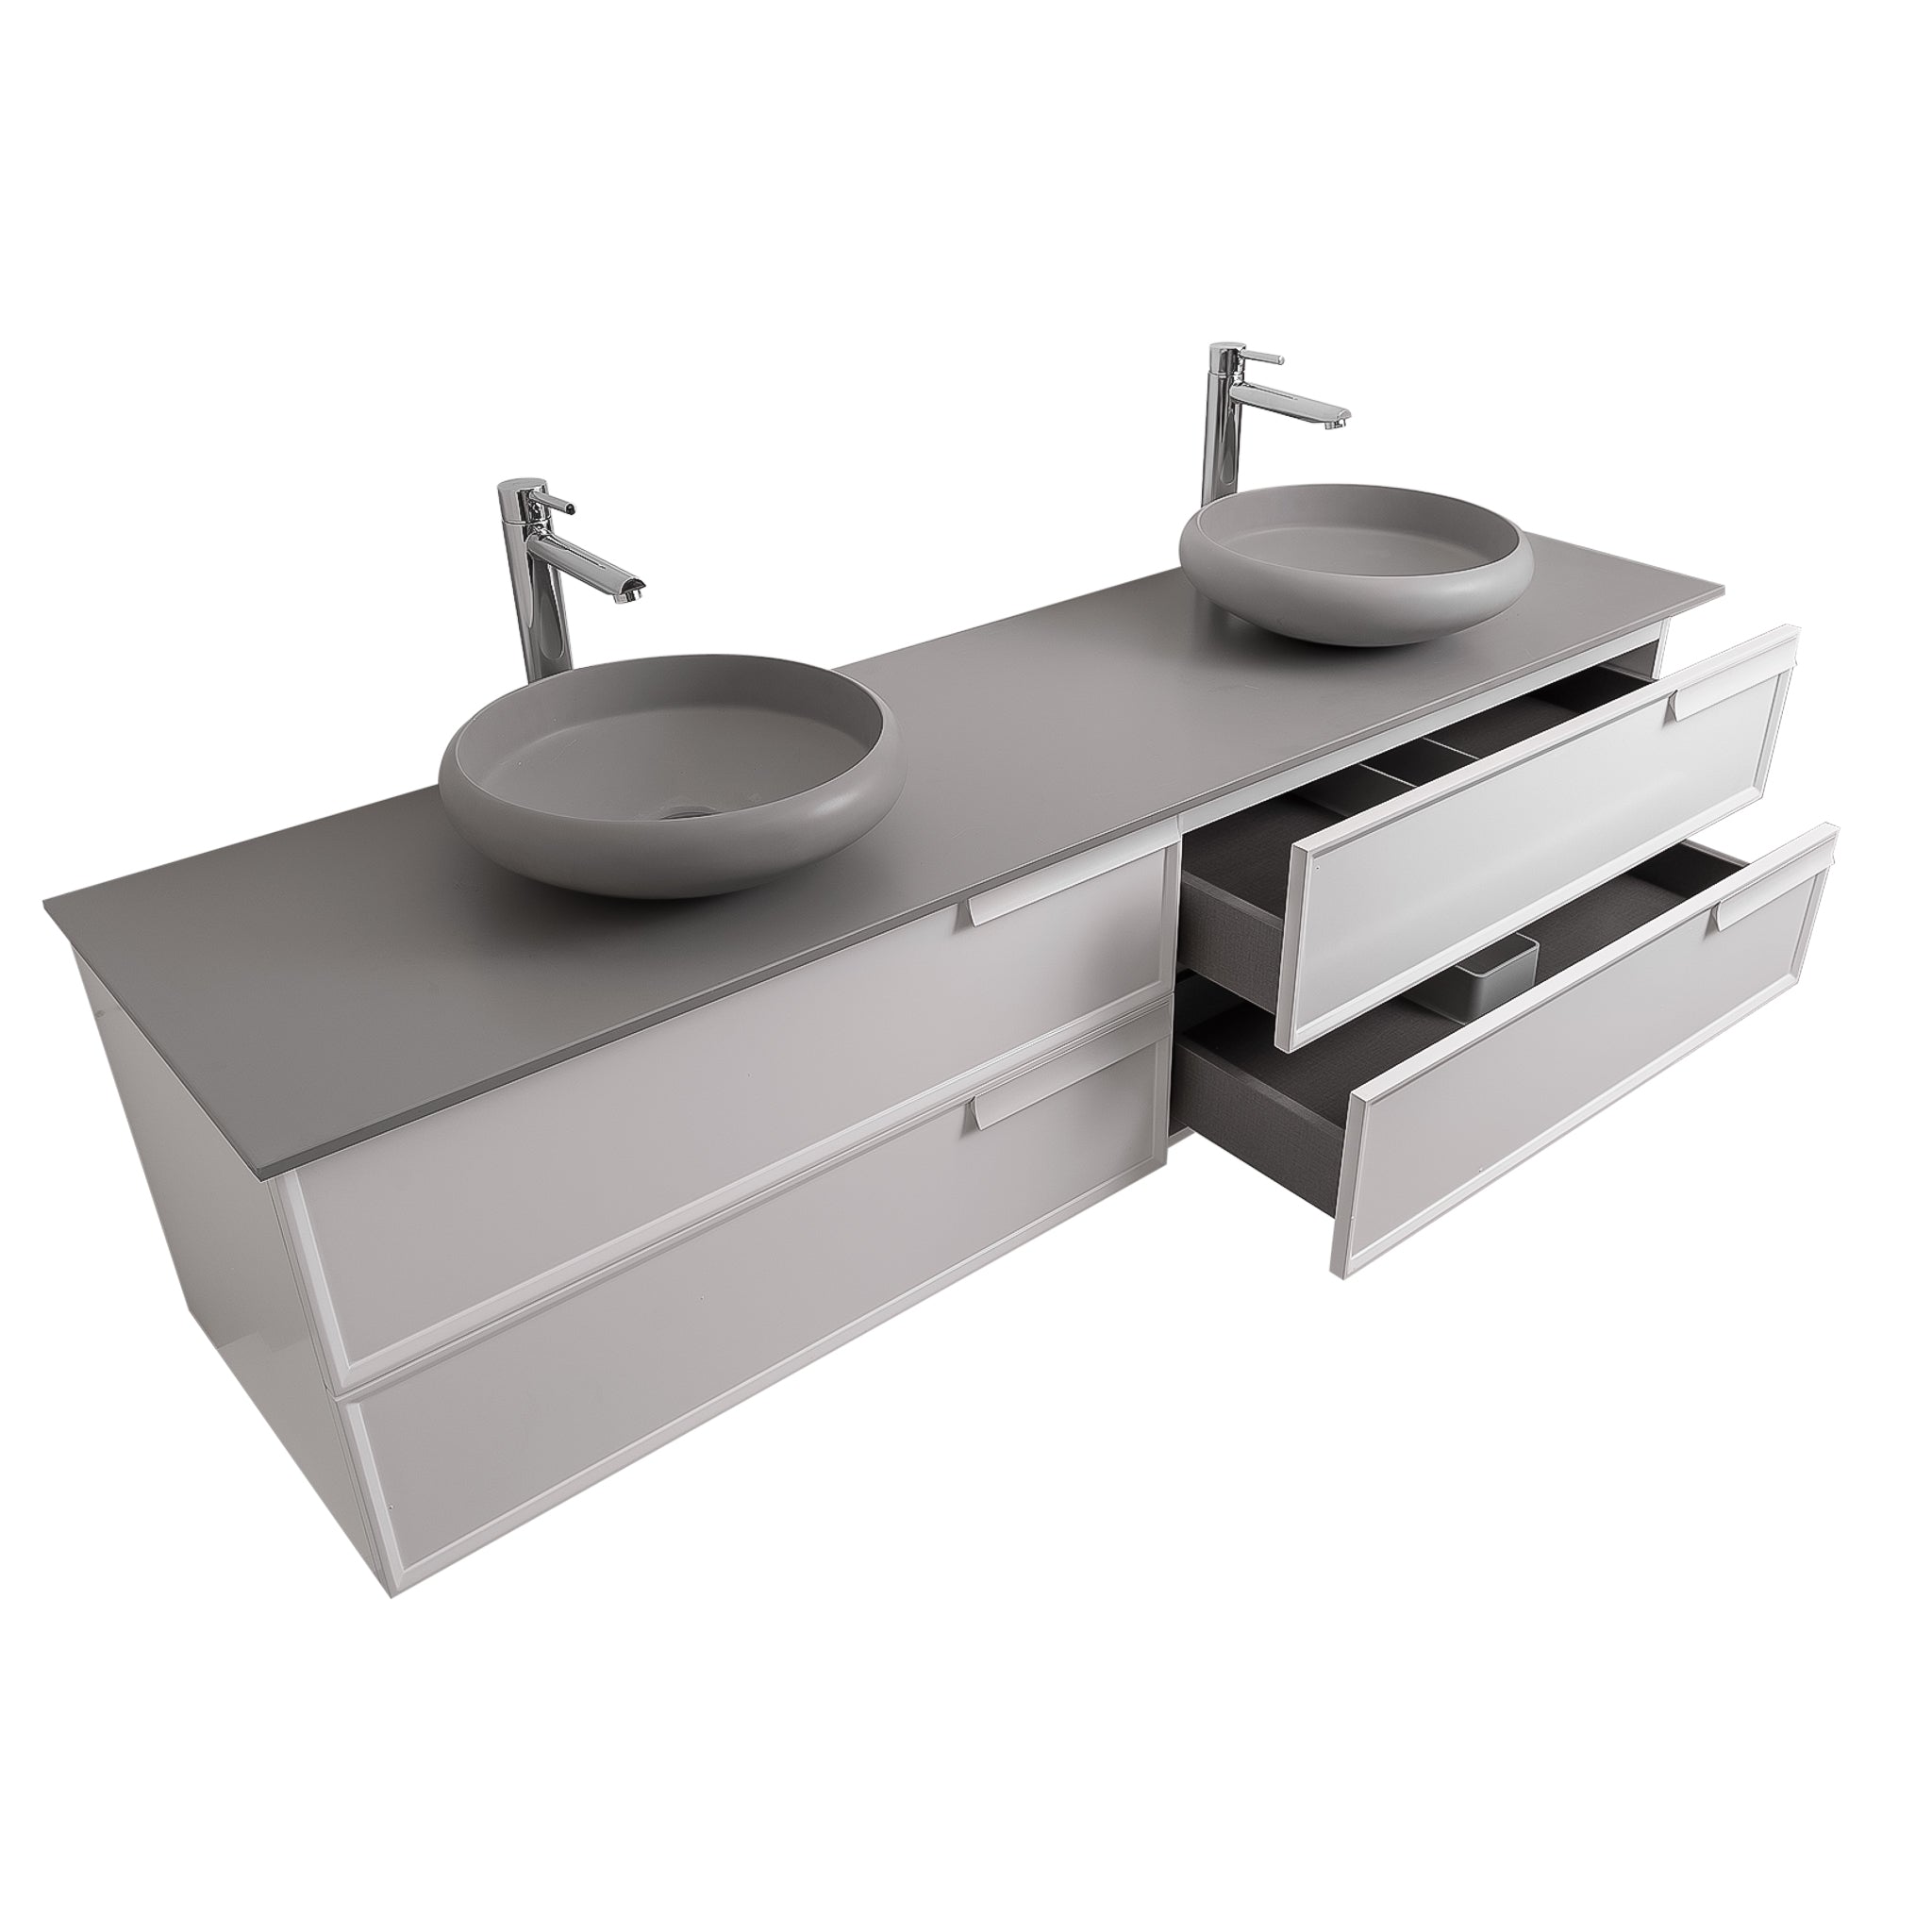 Garda 63 Matte White Cabinet, Solid Surface Flat Grey Counter and Two Round Solid Surface Grey Basin 1153, Wall Mounted Modern Vanity Set